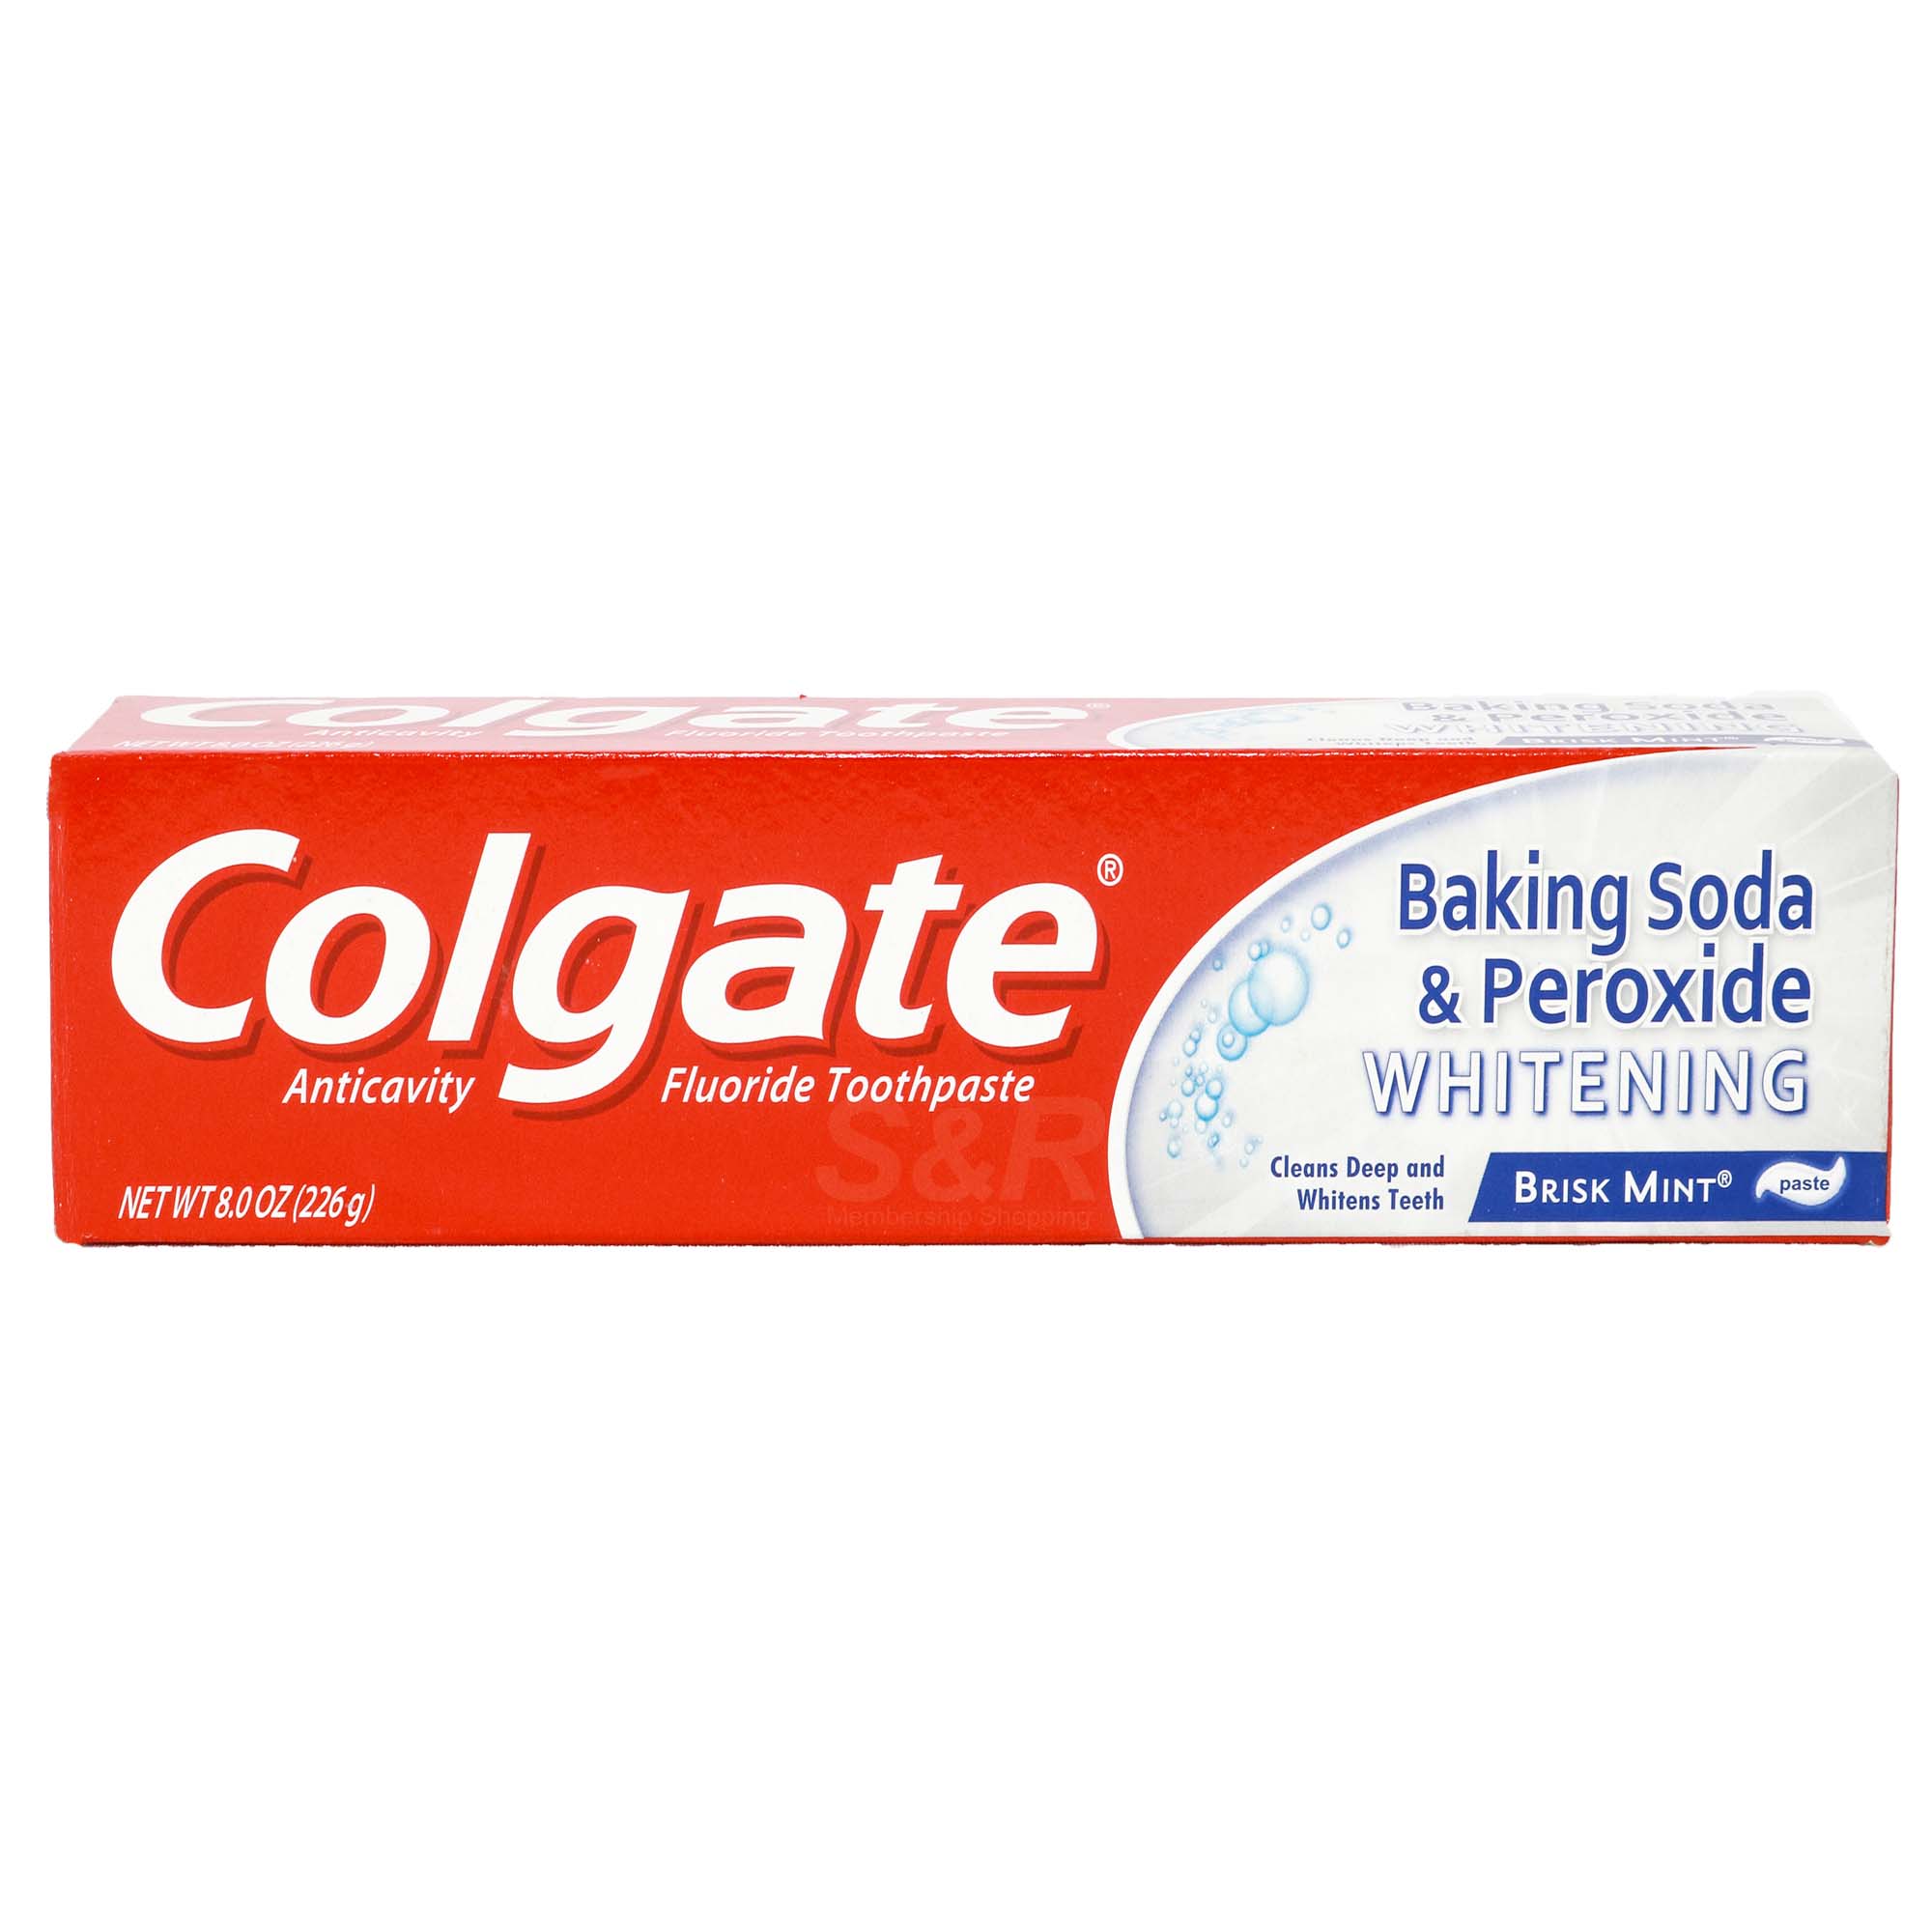 Colgate Baking Soda and Peroxide Whitening Toothpaste 226g